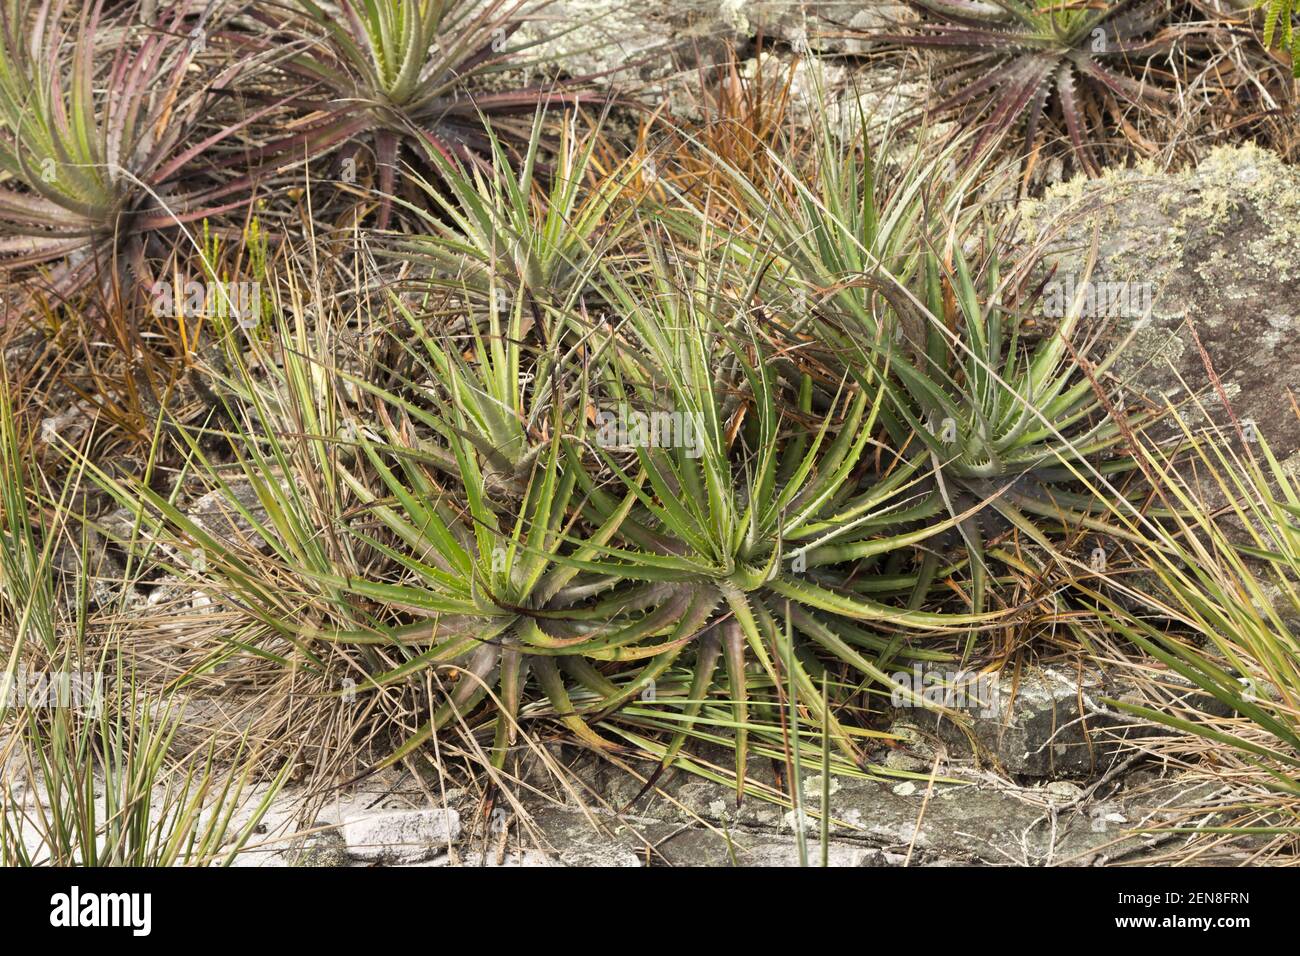 Group of a Bromeliaceae growing in rocky environment close to Itacambira in Minas Gerais, Brazil Stock Photo